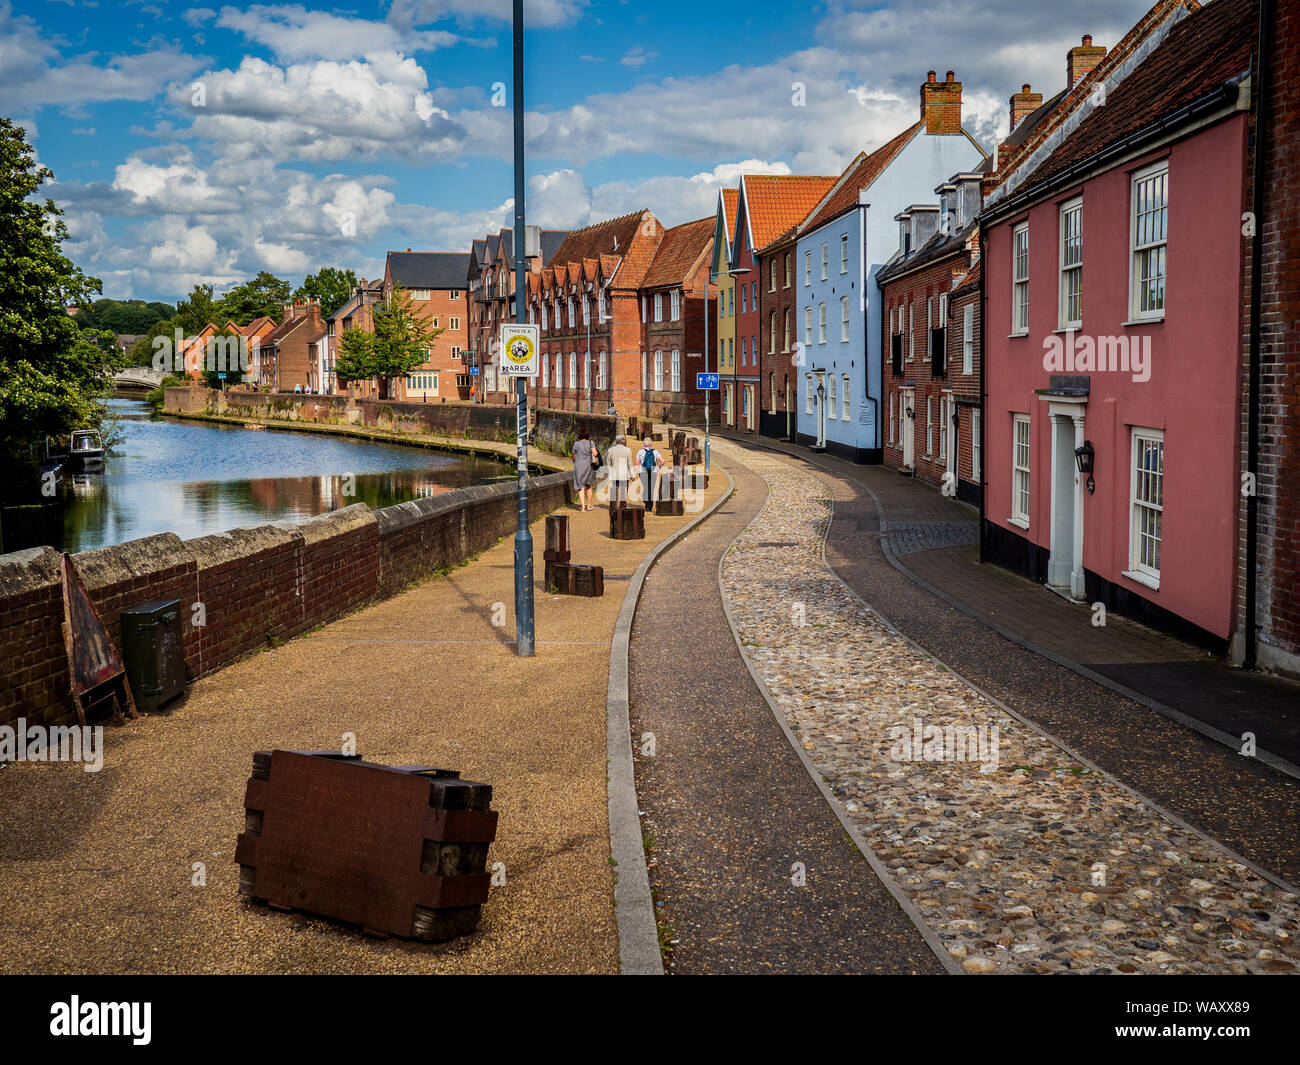 Norwich Quayside - houses on Norwich Quayside in the City Centre next to the River Wensum Stock Photo